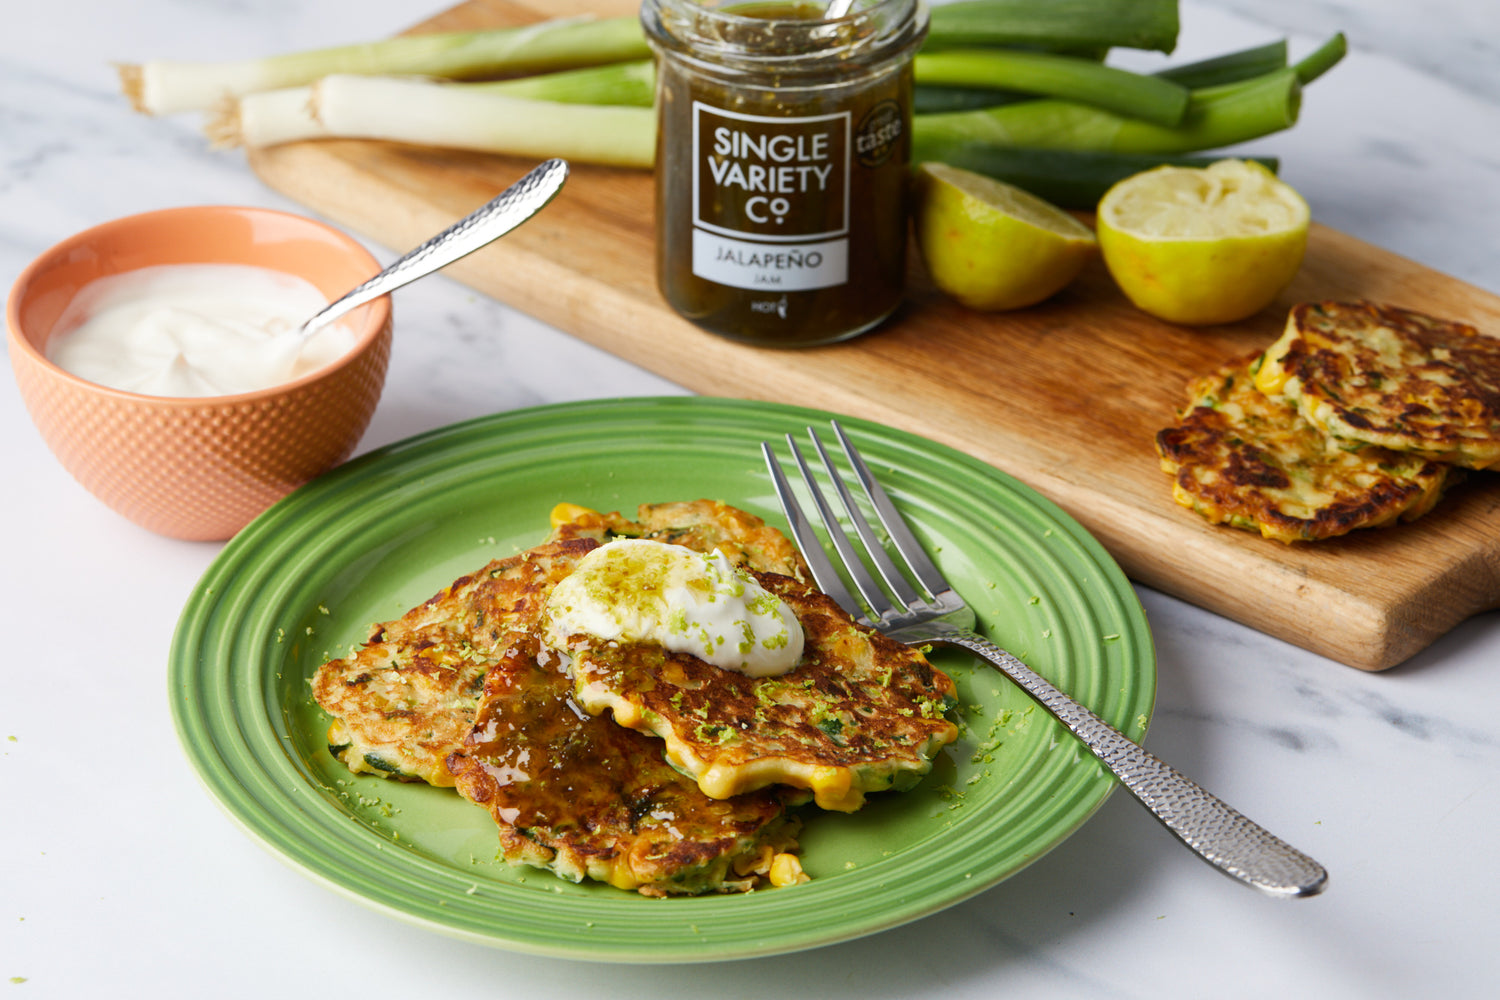 Spicy Courgette & Sweetcorn Fritter with Jalapeno Chilli Jam